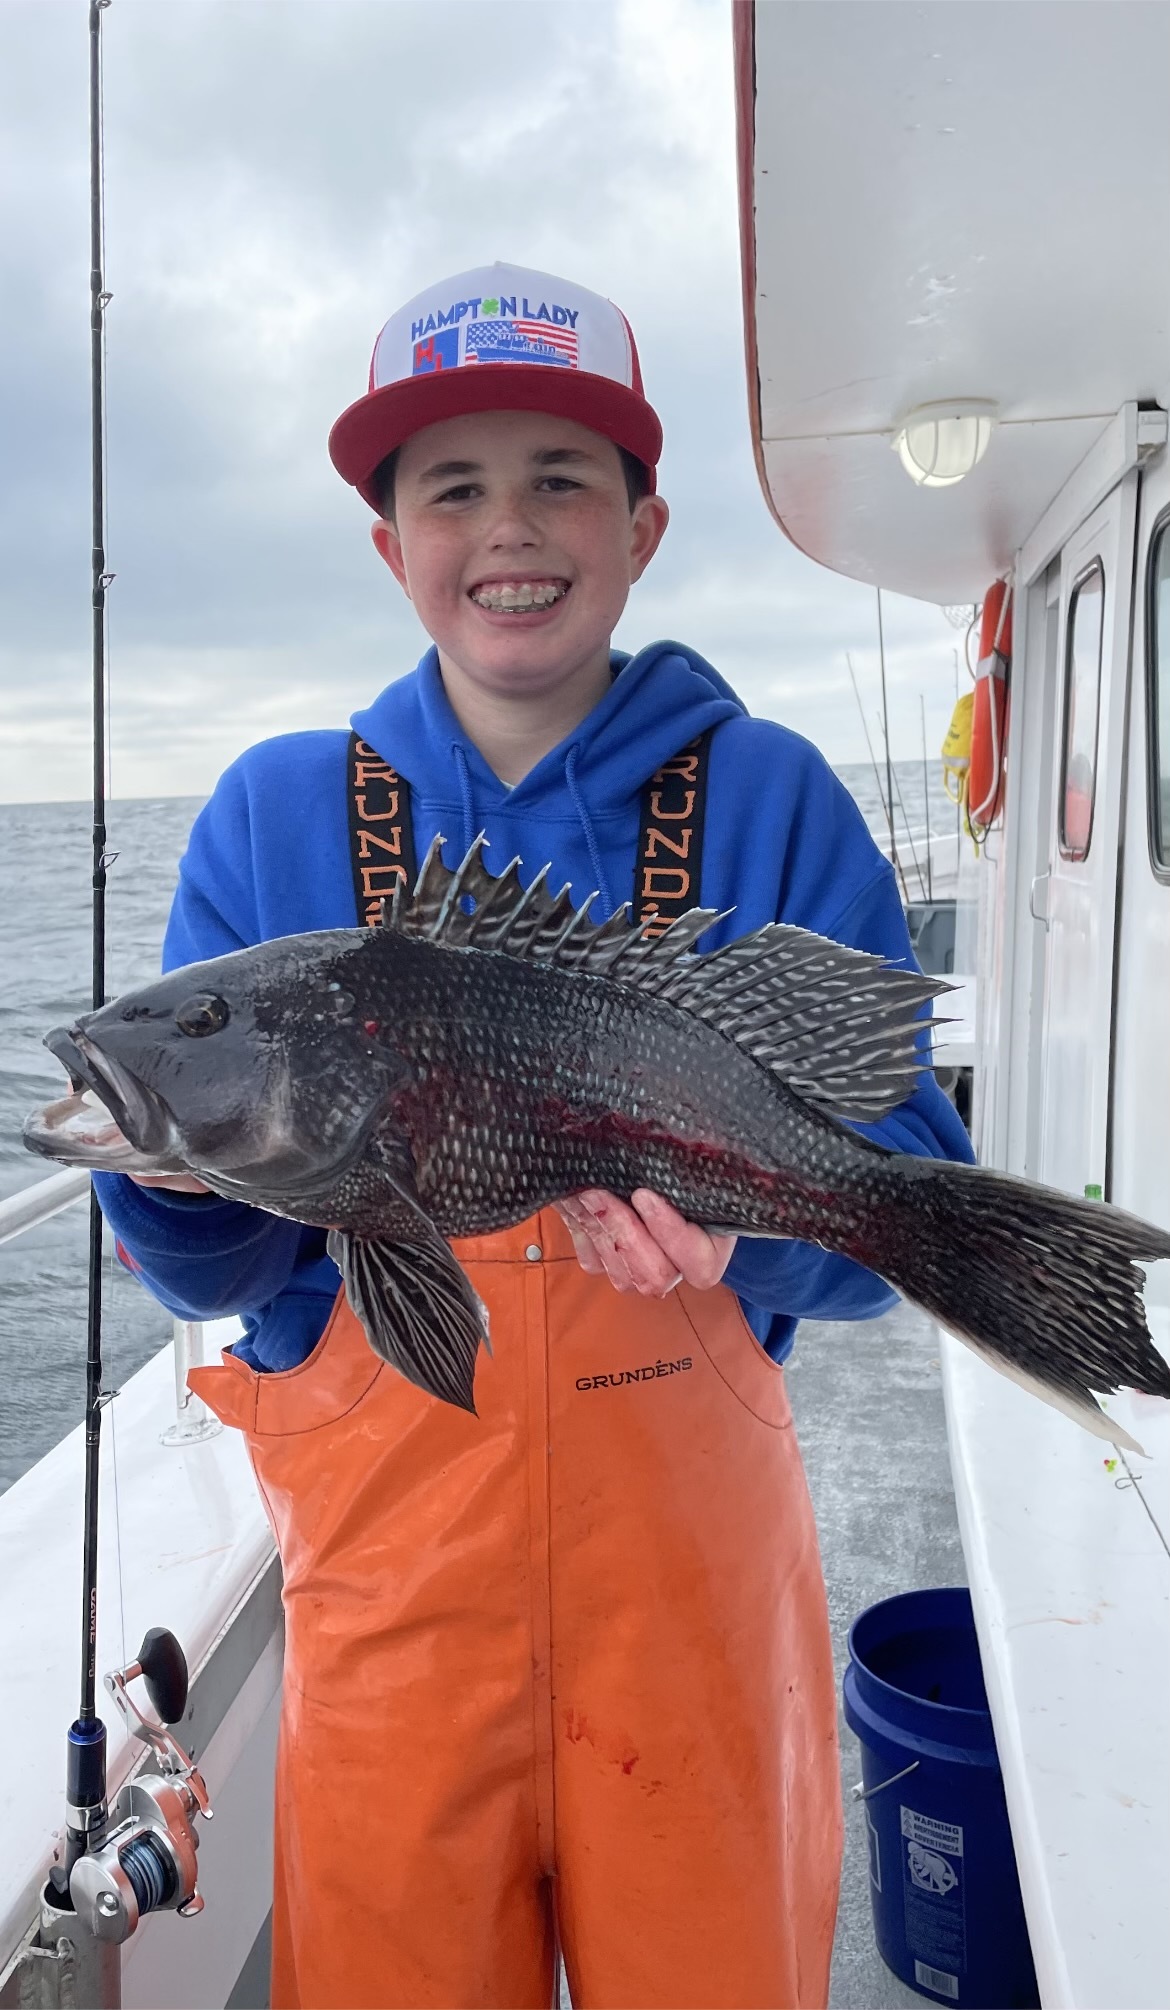 Kevin Kelly of Hampton Bays got in some last licks on the black sea bass aboard the Hampton Lady before the season closed on December 31.